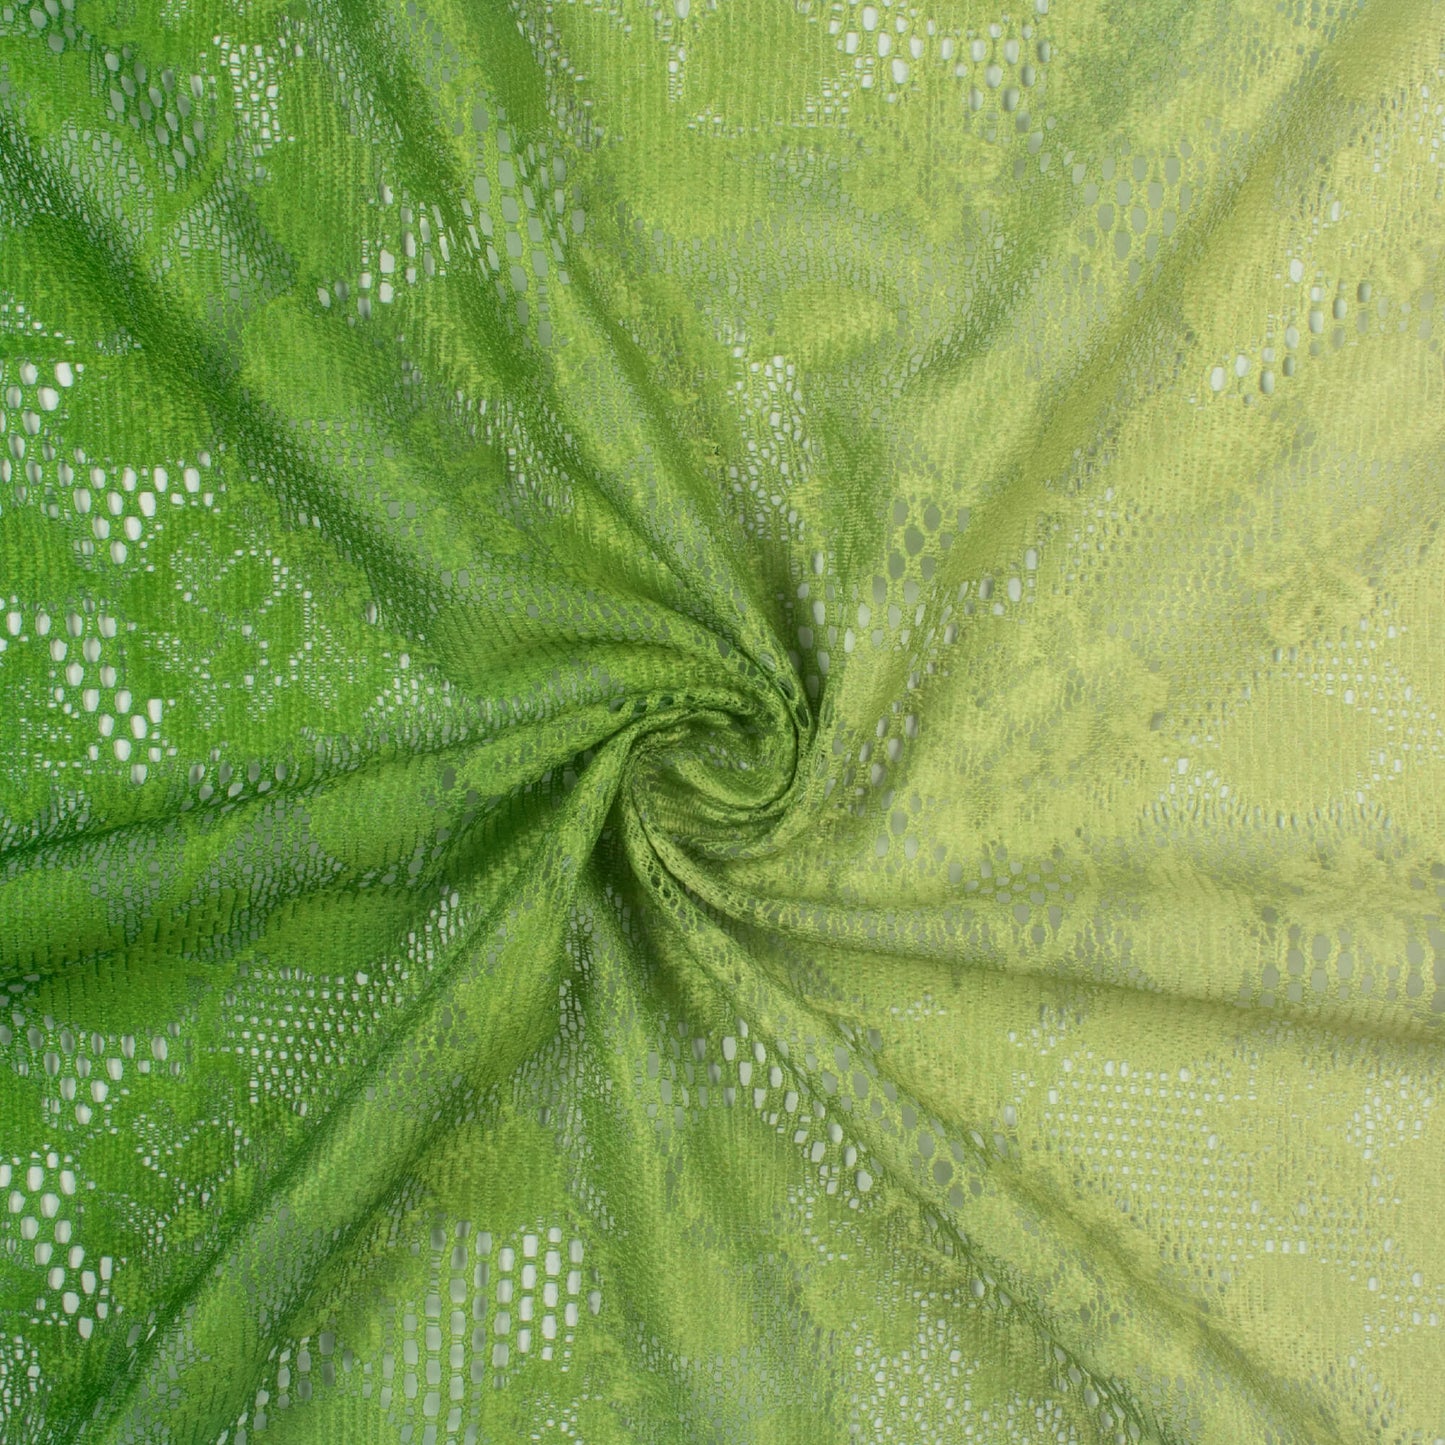 Kelly Green And Pale Yellow Ombre Pattern Digital Print Floral Raschel Net Fabric (Width 58 Inches)